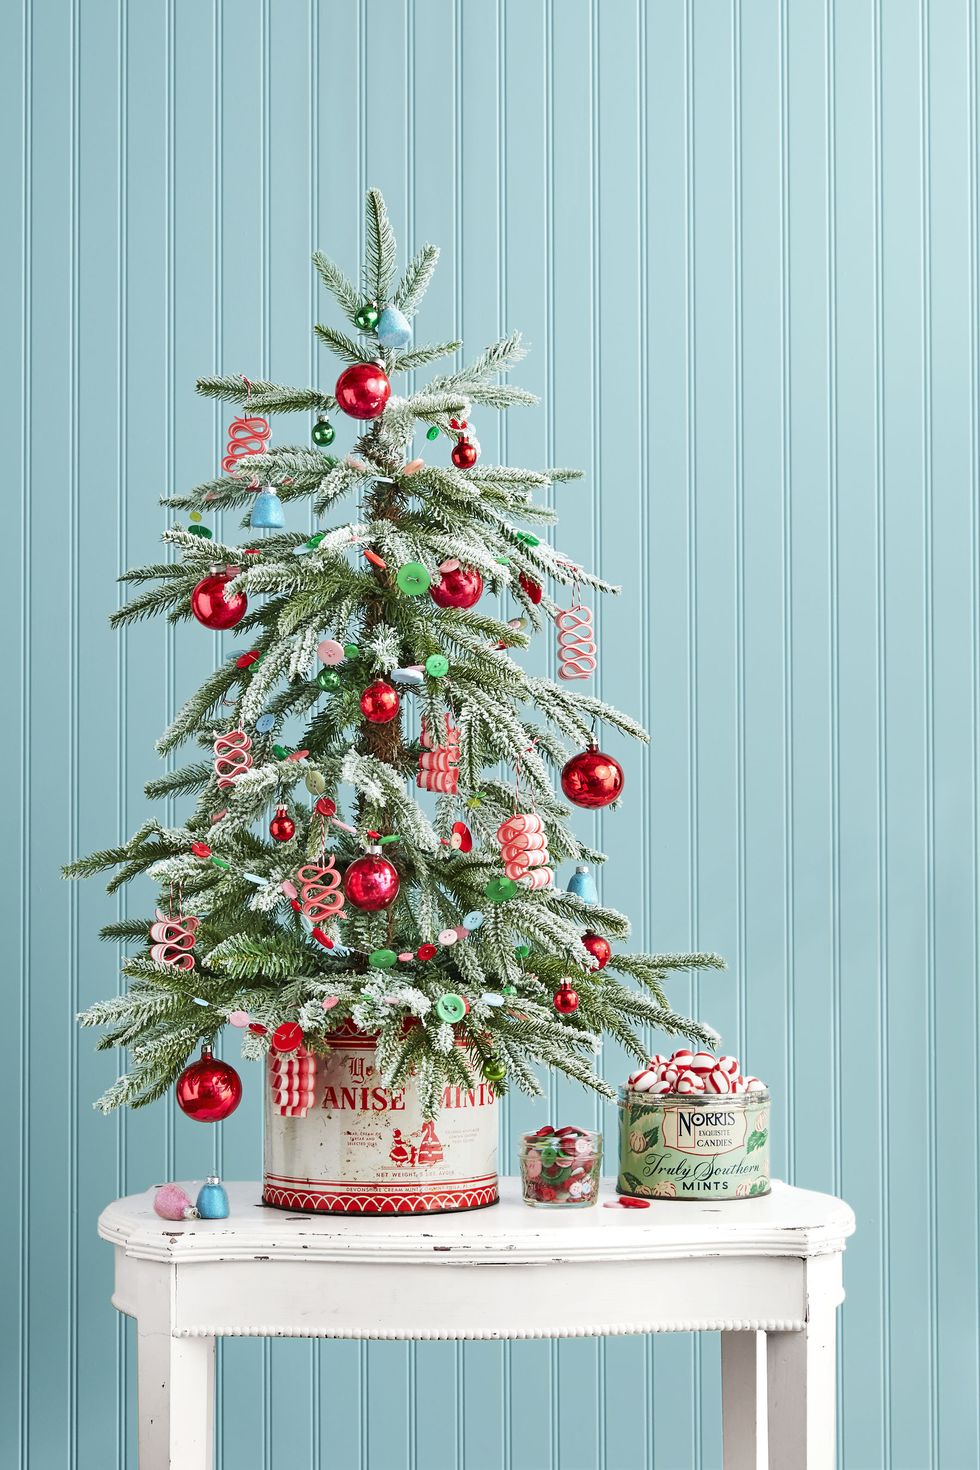 A small Christmas tree on a small table decorated with red and green ornaments against a light blue wall.